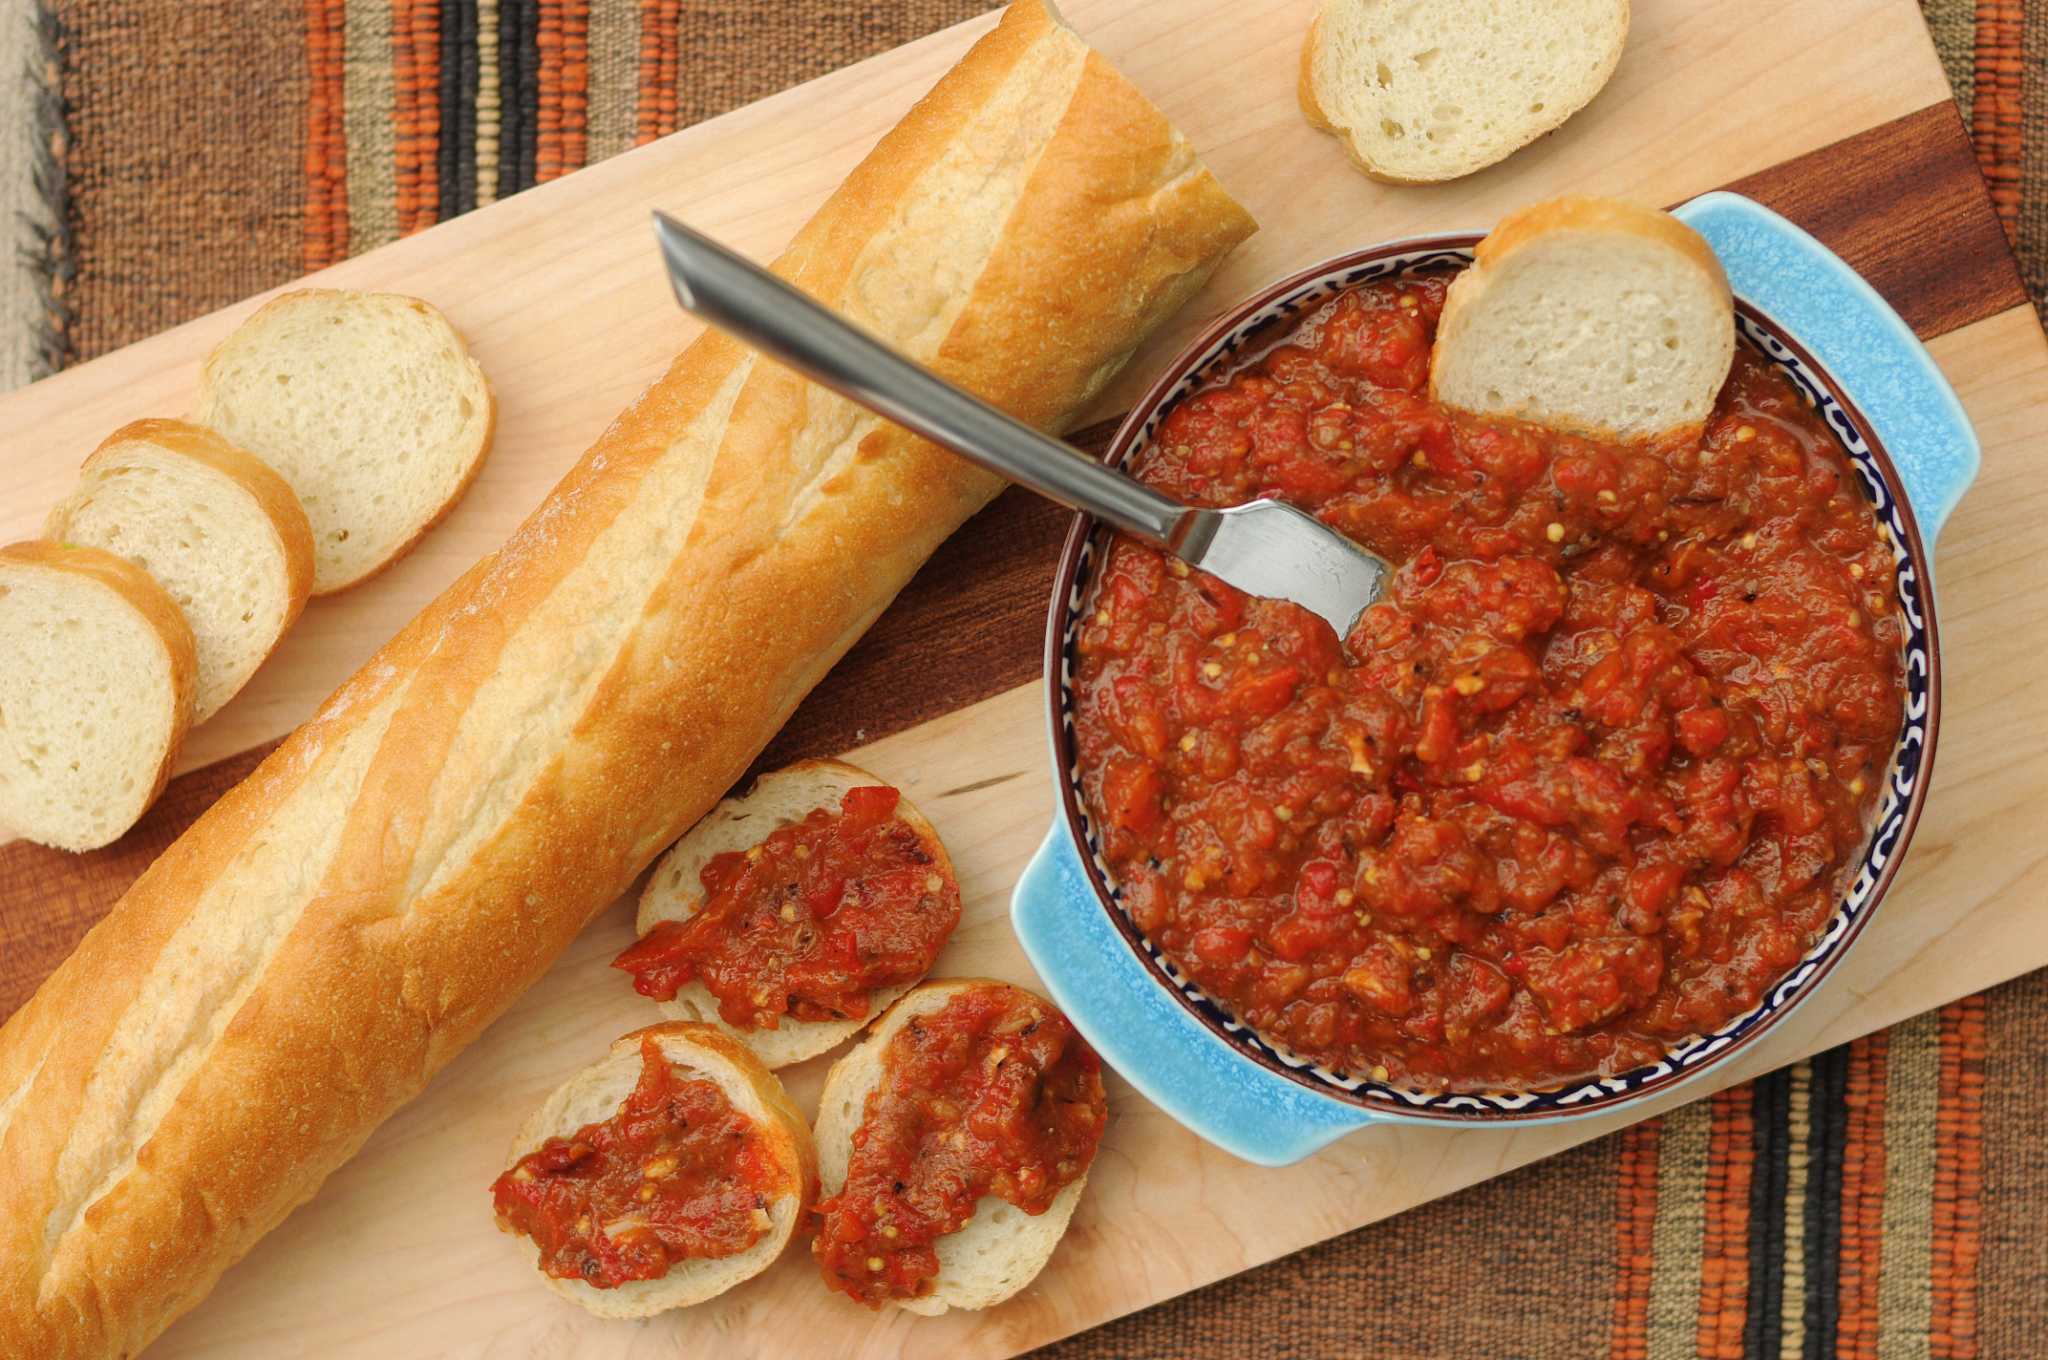 Recipe: Ajvar (Roasted Eggplant and Red Pepper Spread)